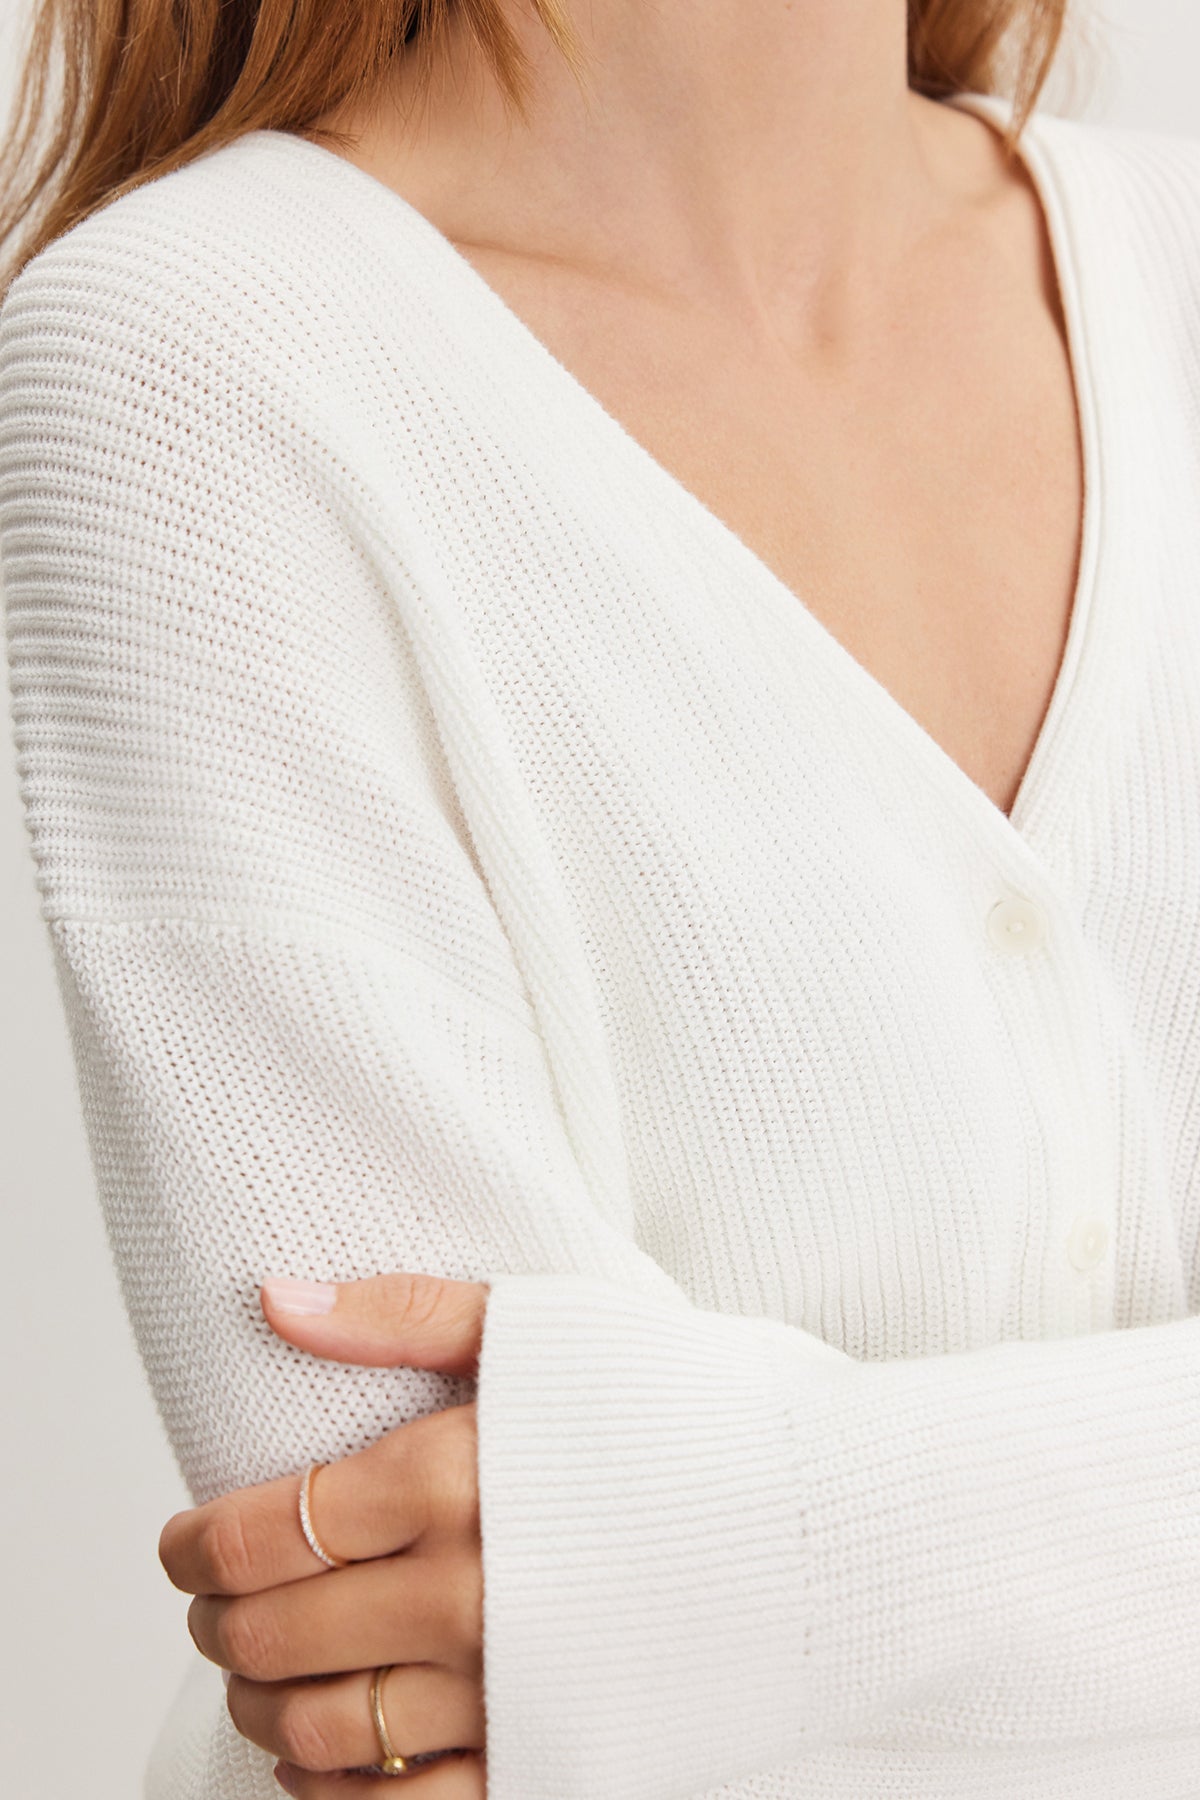 Close-up of a woman in a Velvet by Graham & Spencer Tava cardigan, focusing on the textured cotton knit fabric and her crossed arms with a visible gold ring on her finger.-36909564428481